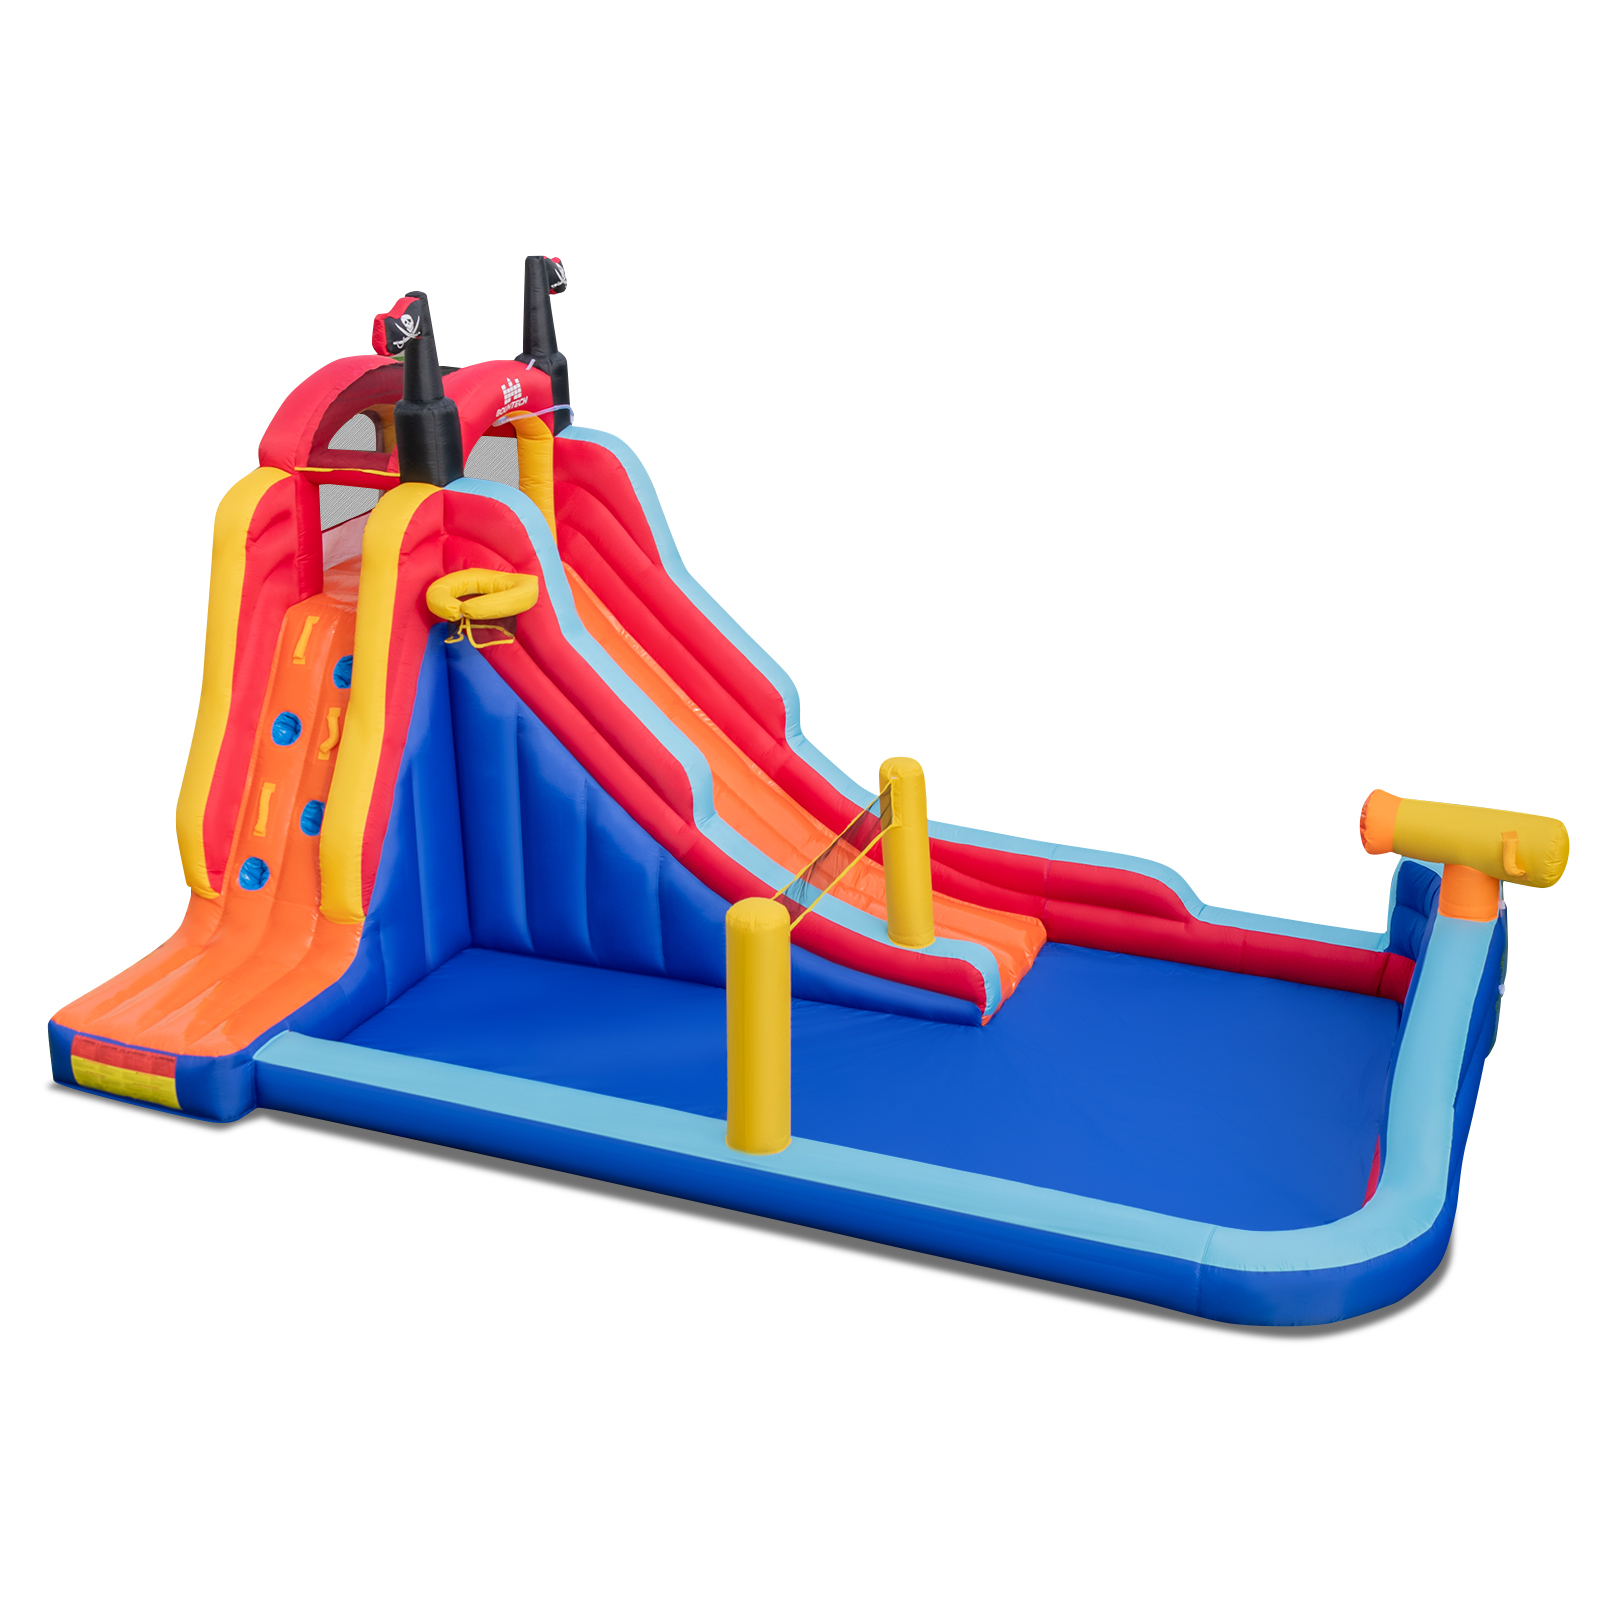 5-in-1 Pirate Theme Inflatable Water Slide Park with Slide